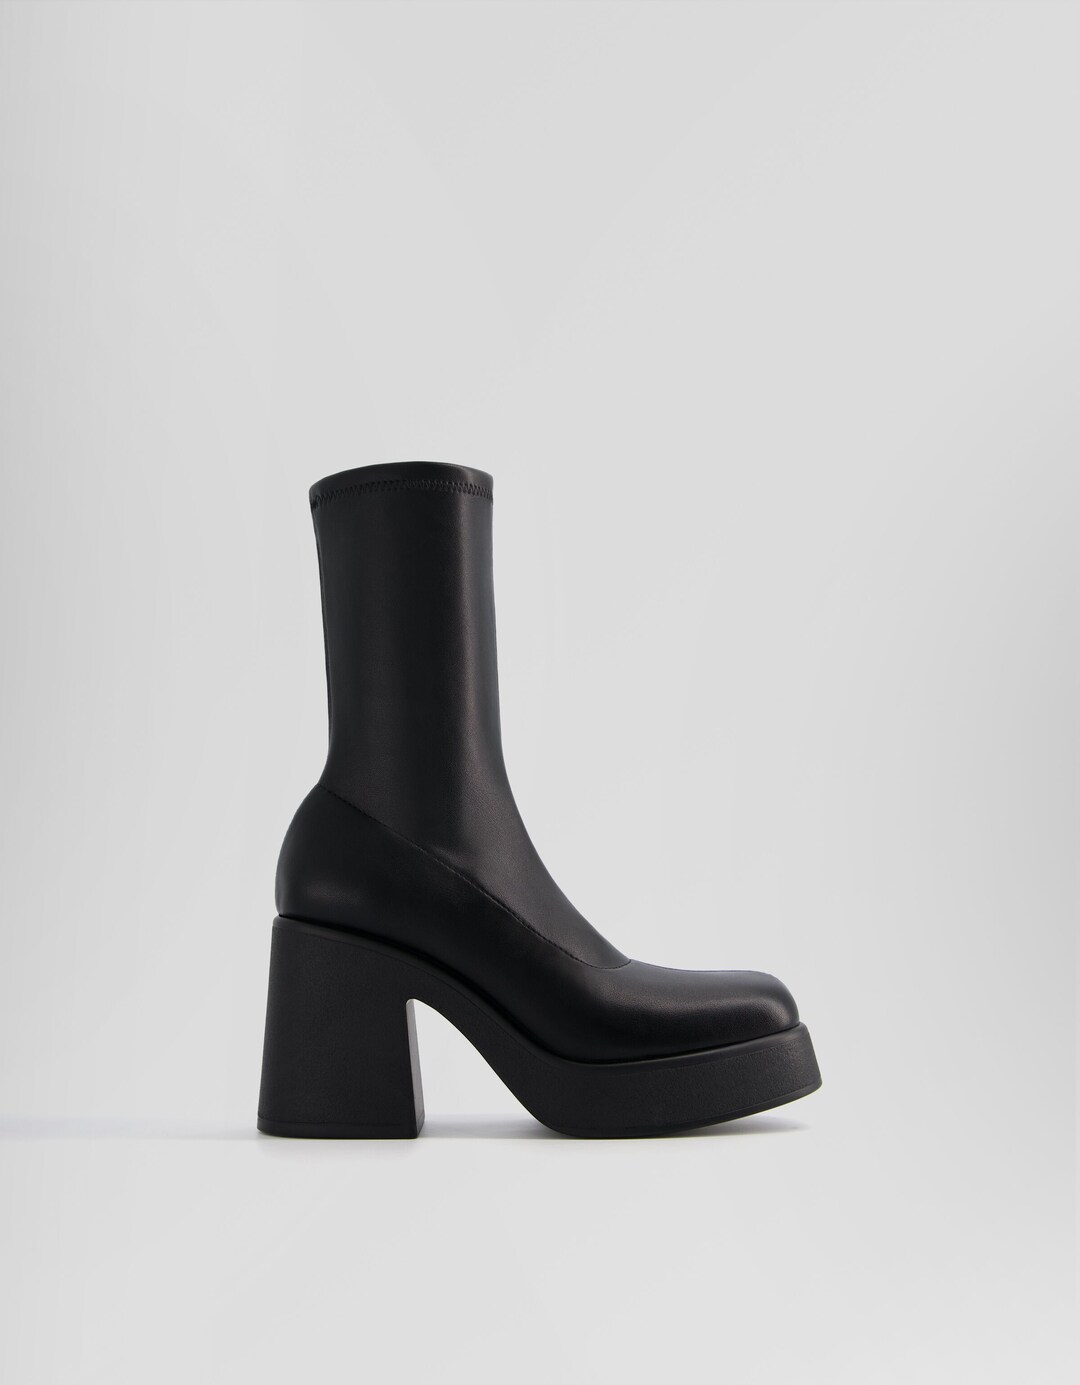 Fitted high-heel platform ankle boots.